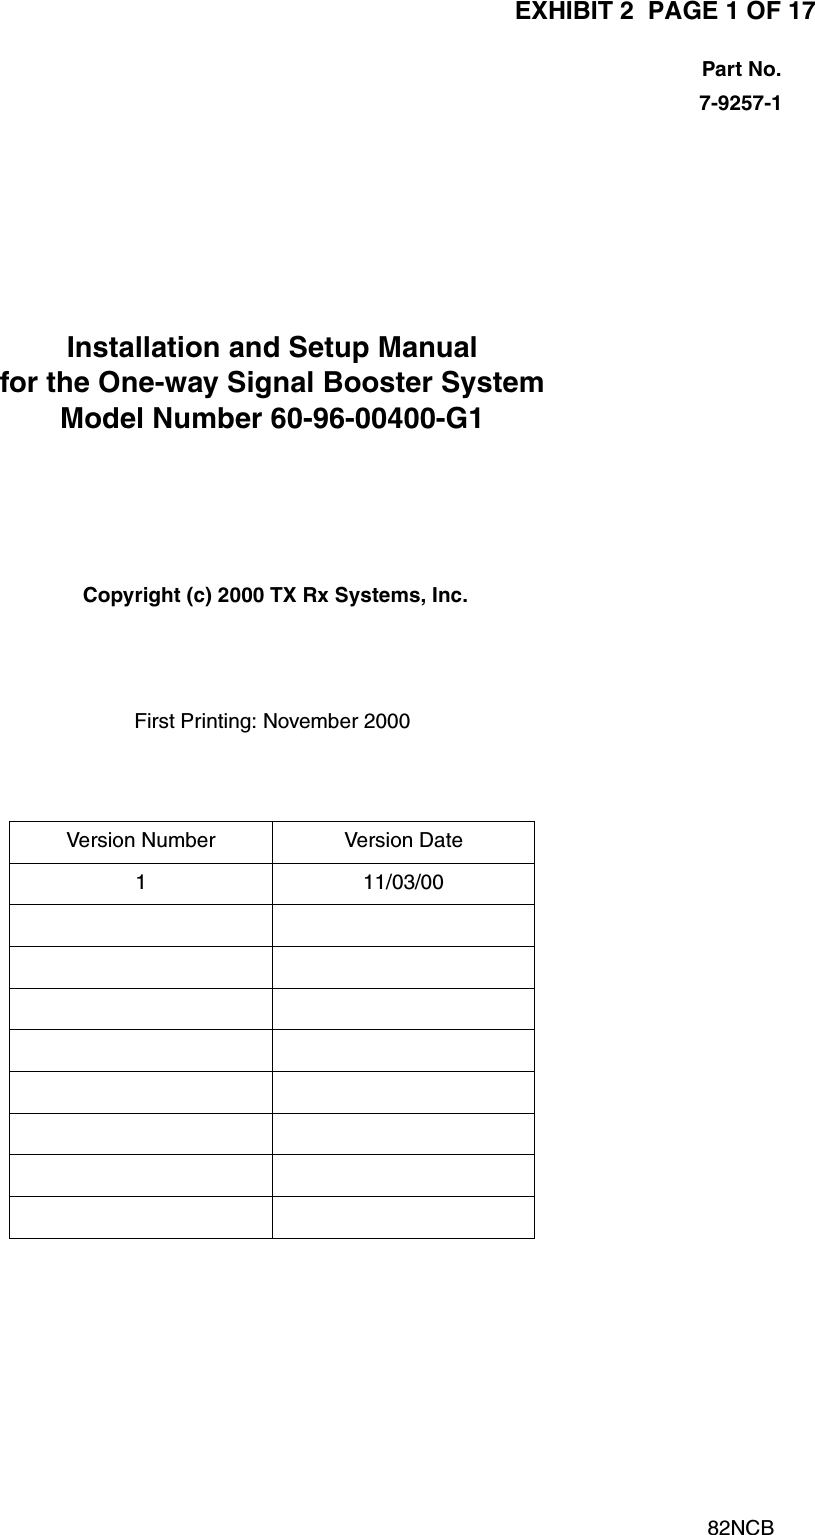 EXHIBIT 2  PAGE 1 OF 17TX RX Systems Inc.                           Manual 7-9257 (version 1)                          11/03/00                           Page 17-9257-1Installation and Setup Manualfor the One-way Signal Booster SystemModel Number 60-96-00400-G1First Printing: November 2000Version Number Version Date1 11/03/0082NCBPart No.Copyright (c) 2000 TX Rx Systems, Inc.